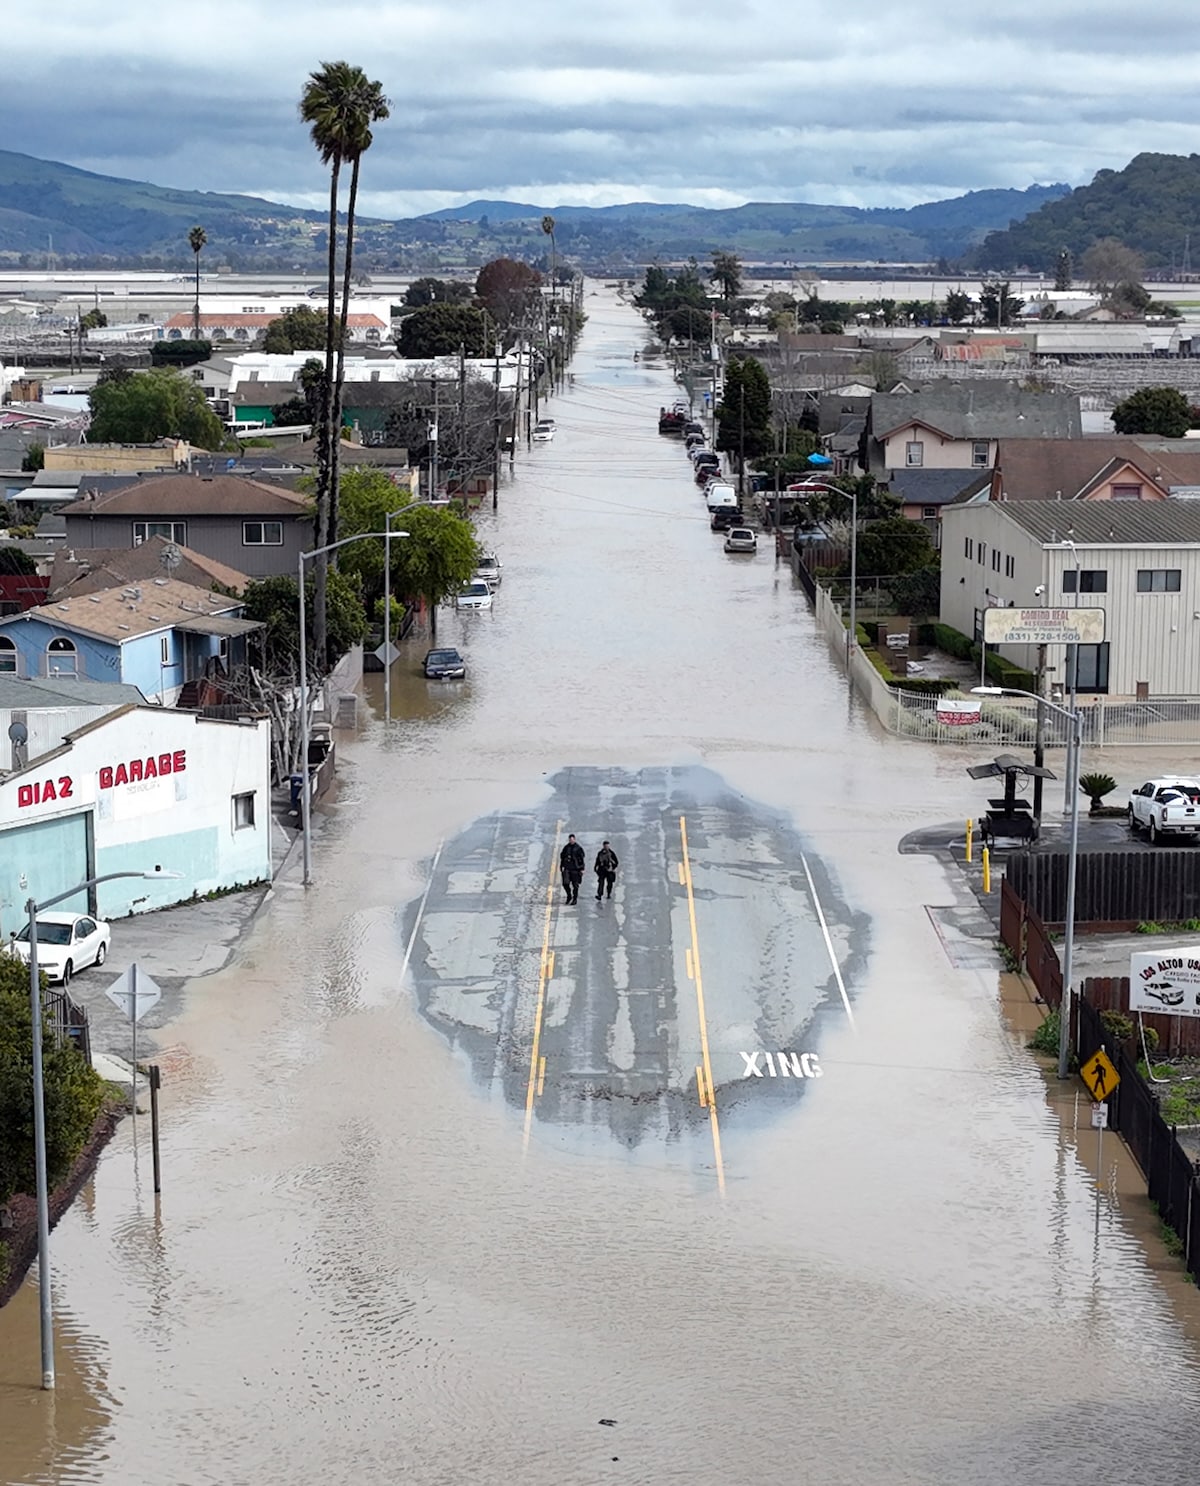 Aerial view of two people standing in a small patch of road amid floodwaters in Pajaro, California